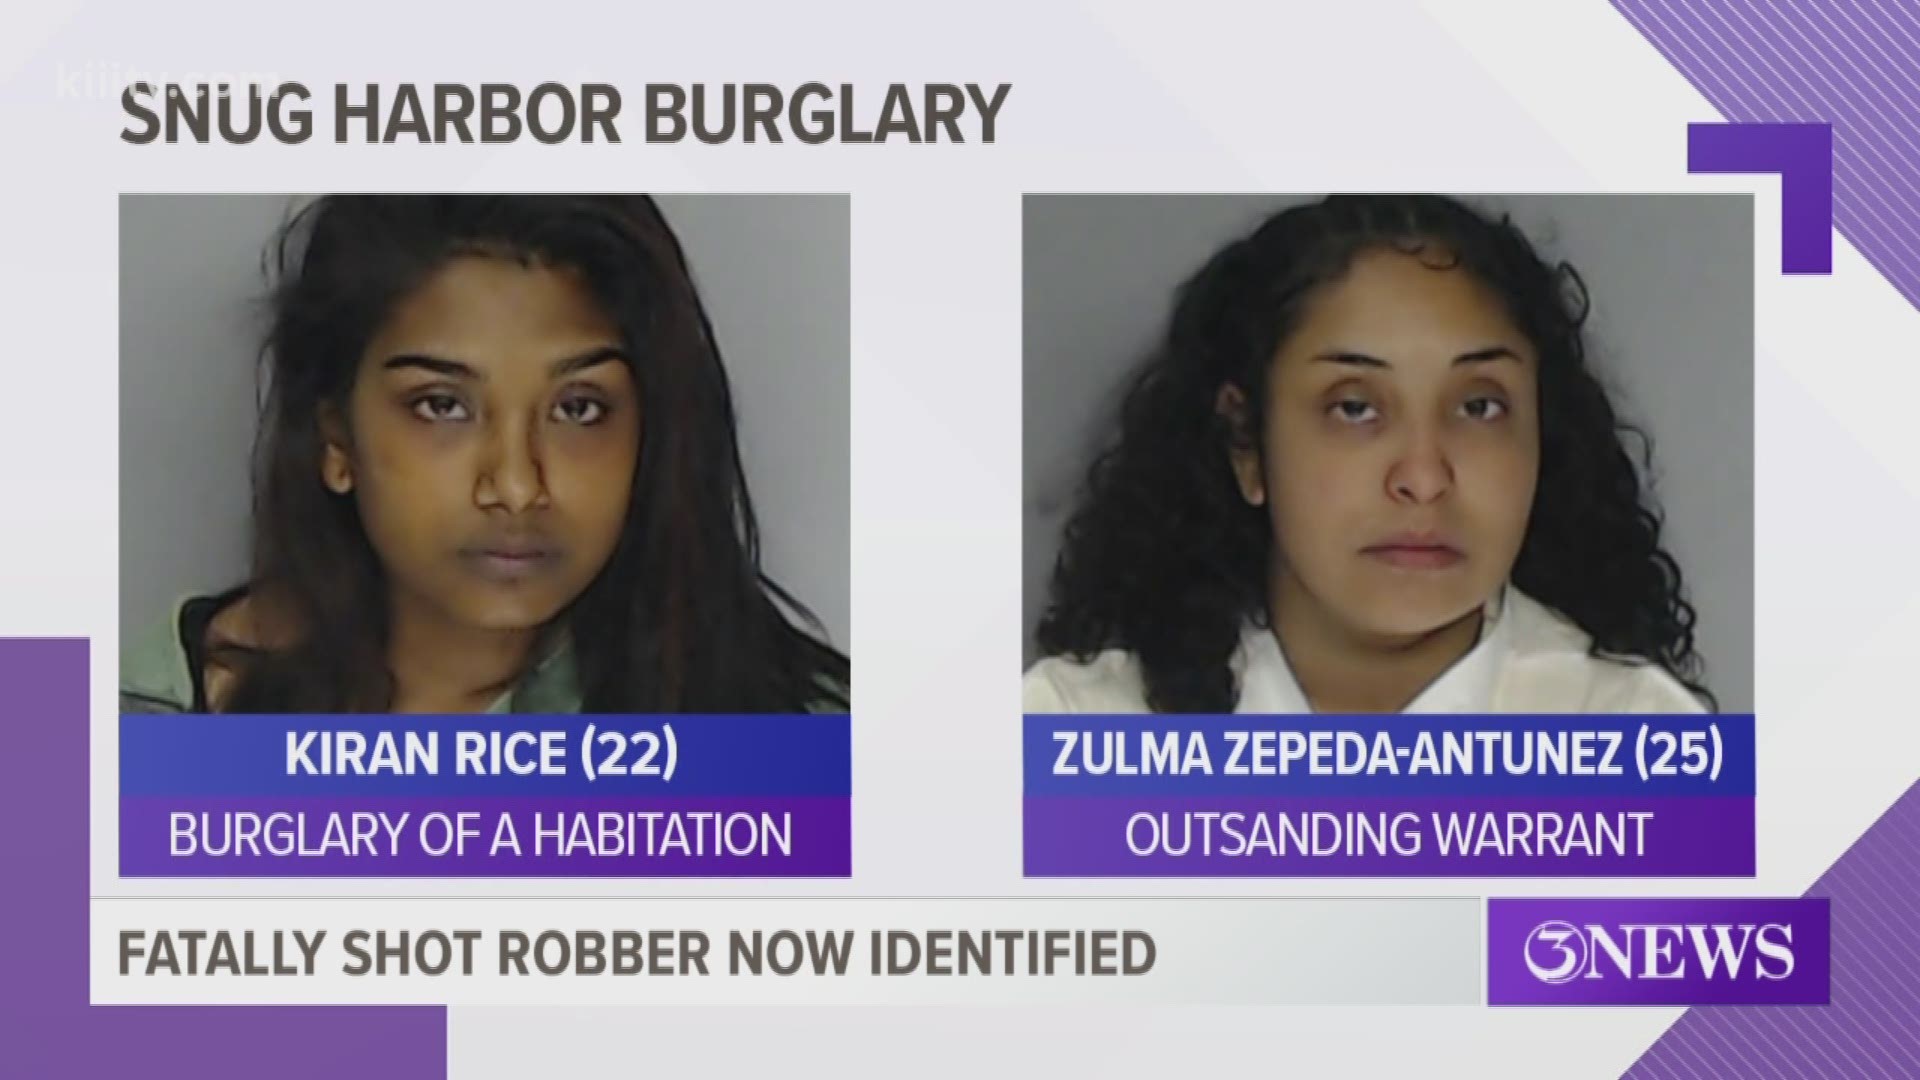 The burglary took place Monday at 12:49 a.m. in the 700 block of Snug Harbor.